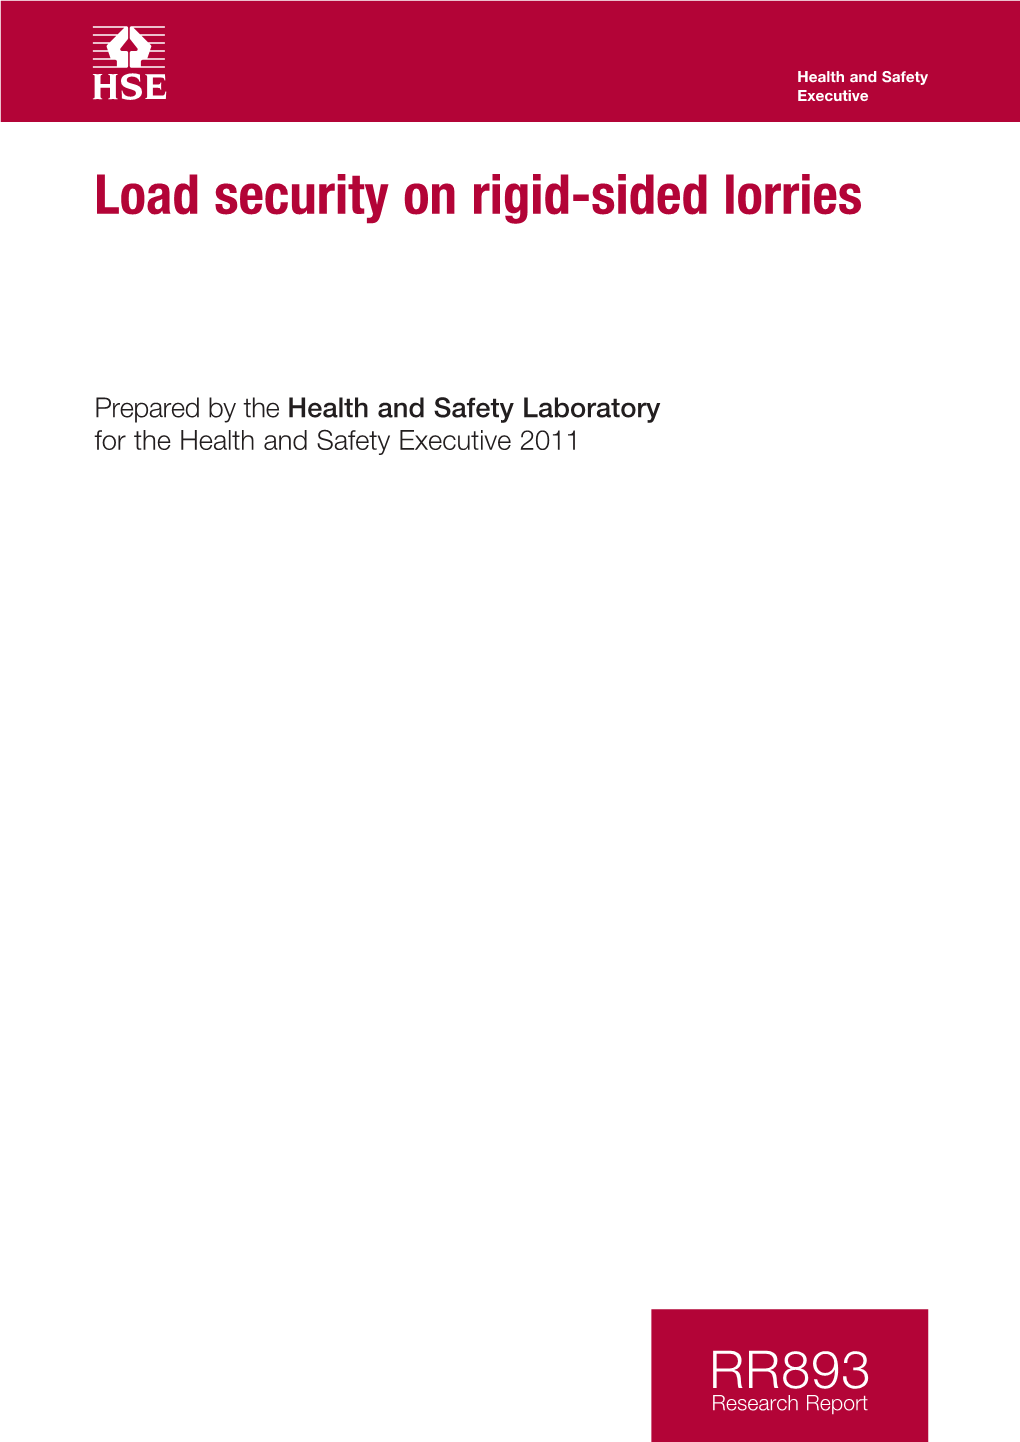 RR893 Research Report Health and Safety Executive